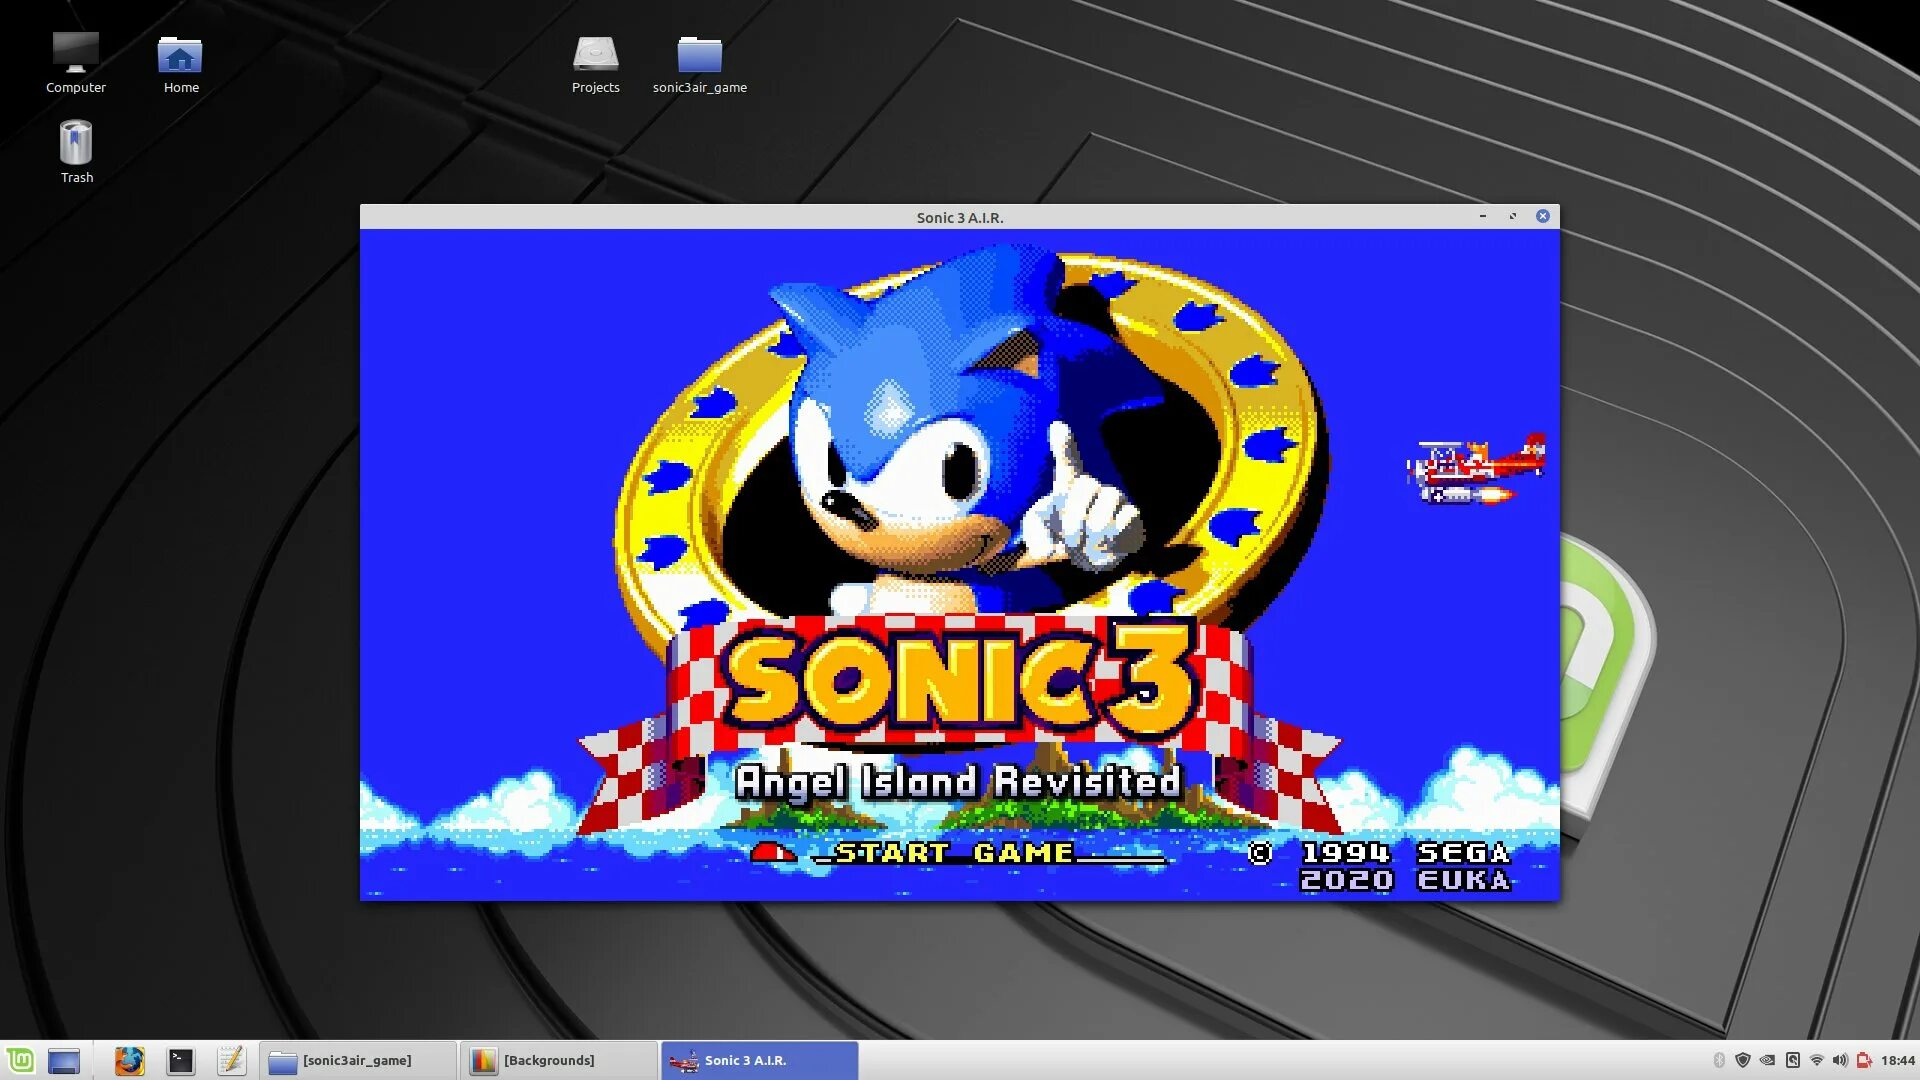 Sonic 3 mode. Sonic 3 АИР. Sonic 3 Air ROM. Соник 3 a.i.r. Sonic 3 complete.